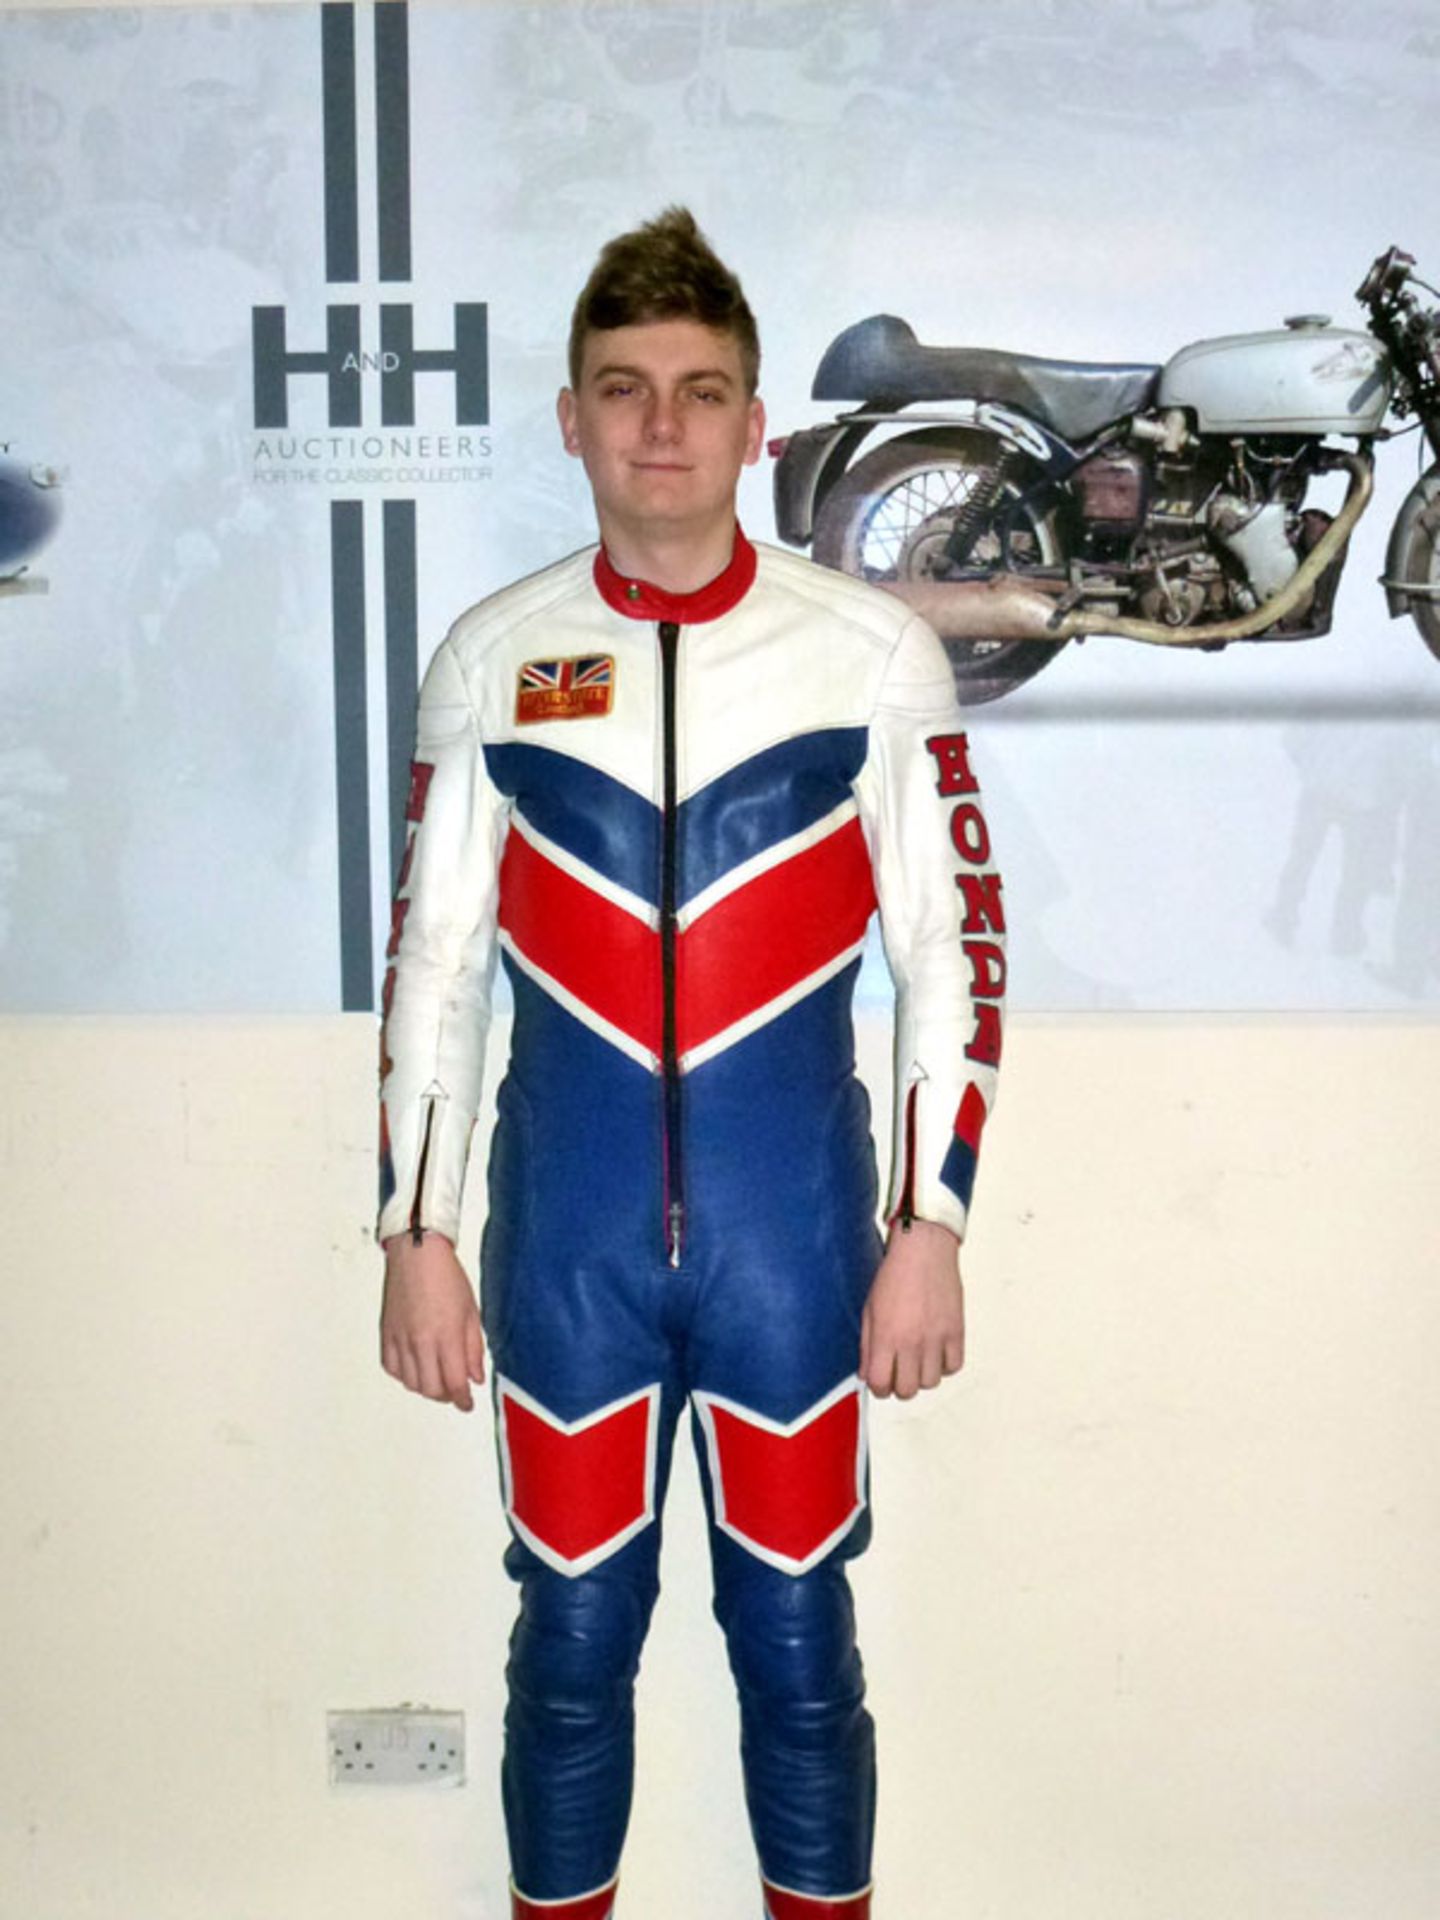 Two Pairs of Honda Motorcycle Leathers - Image 3 of 4